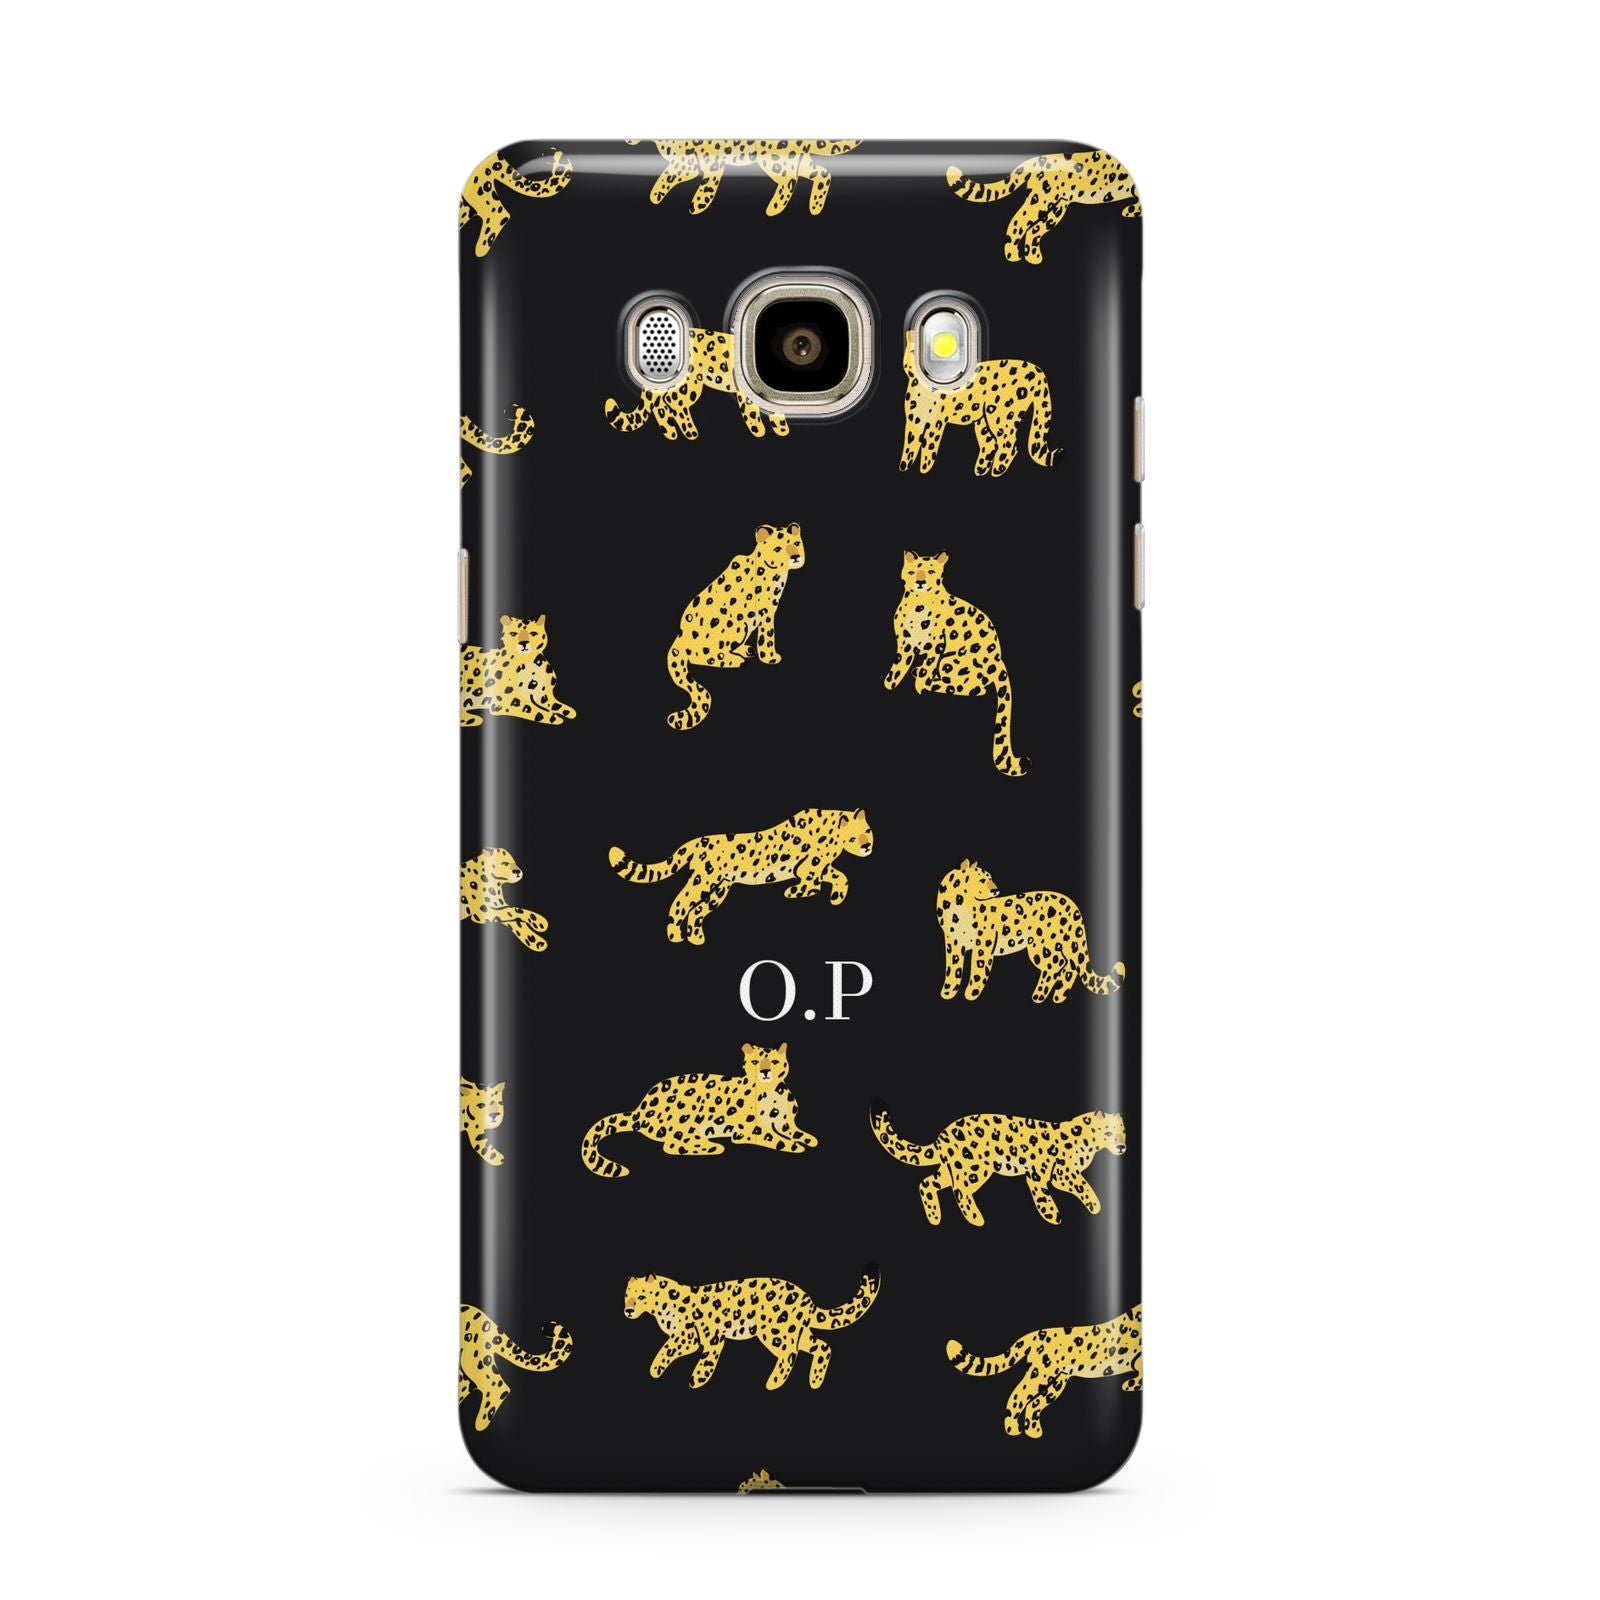 Prowling Leopard Samsung Galaxy J7 2016 Case on gold phone